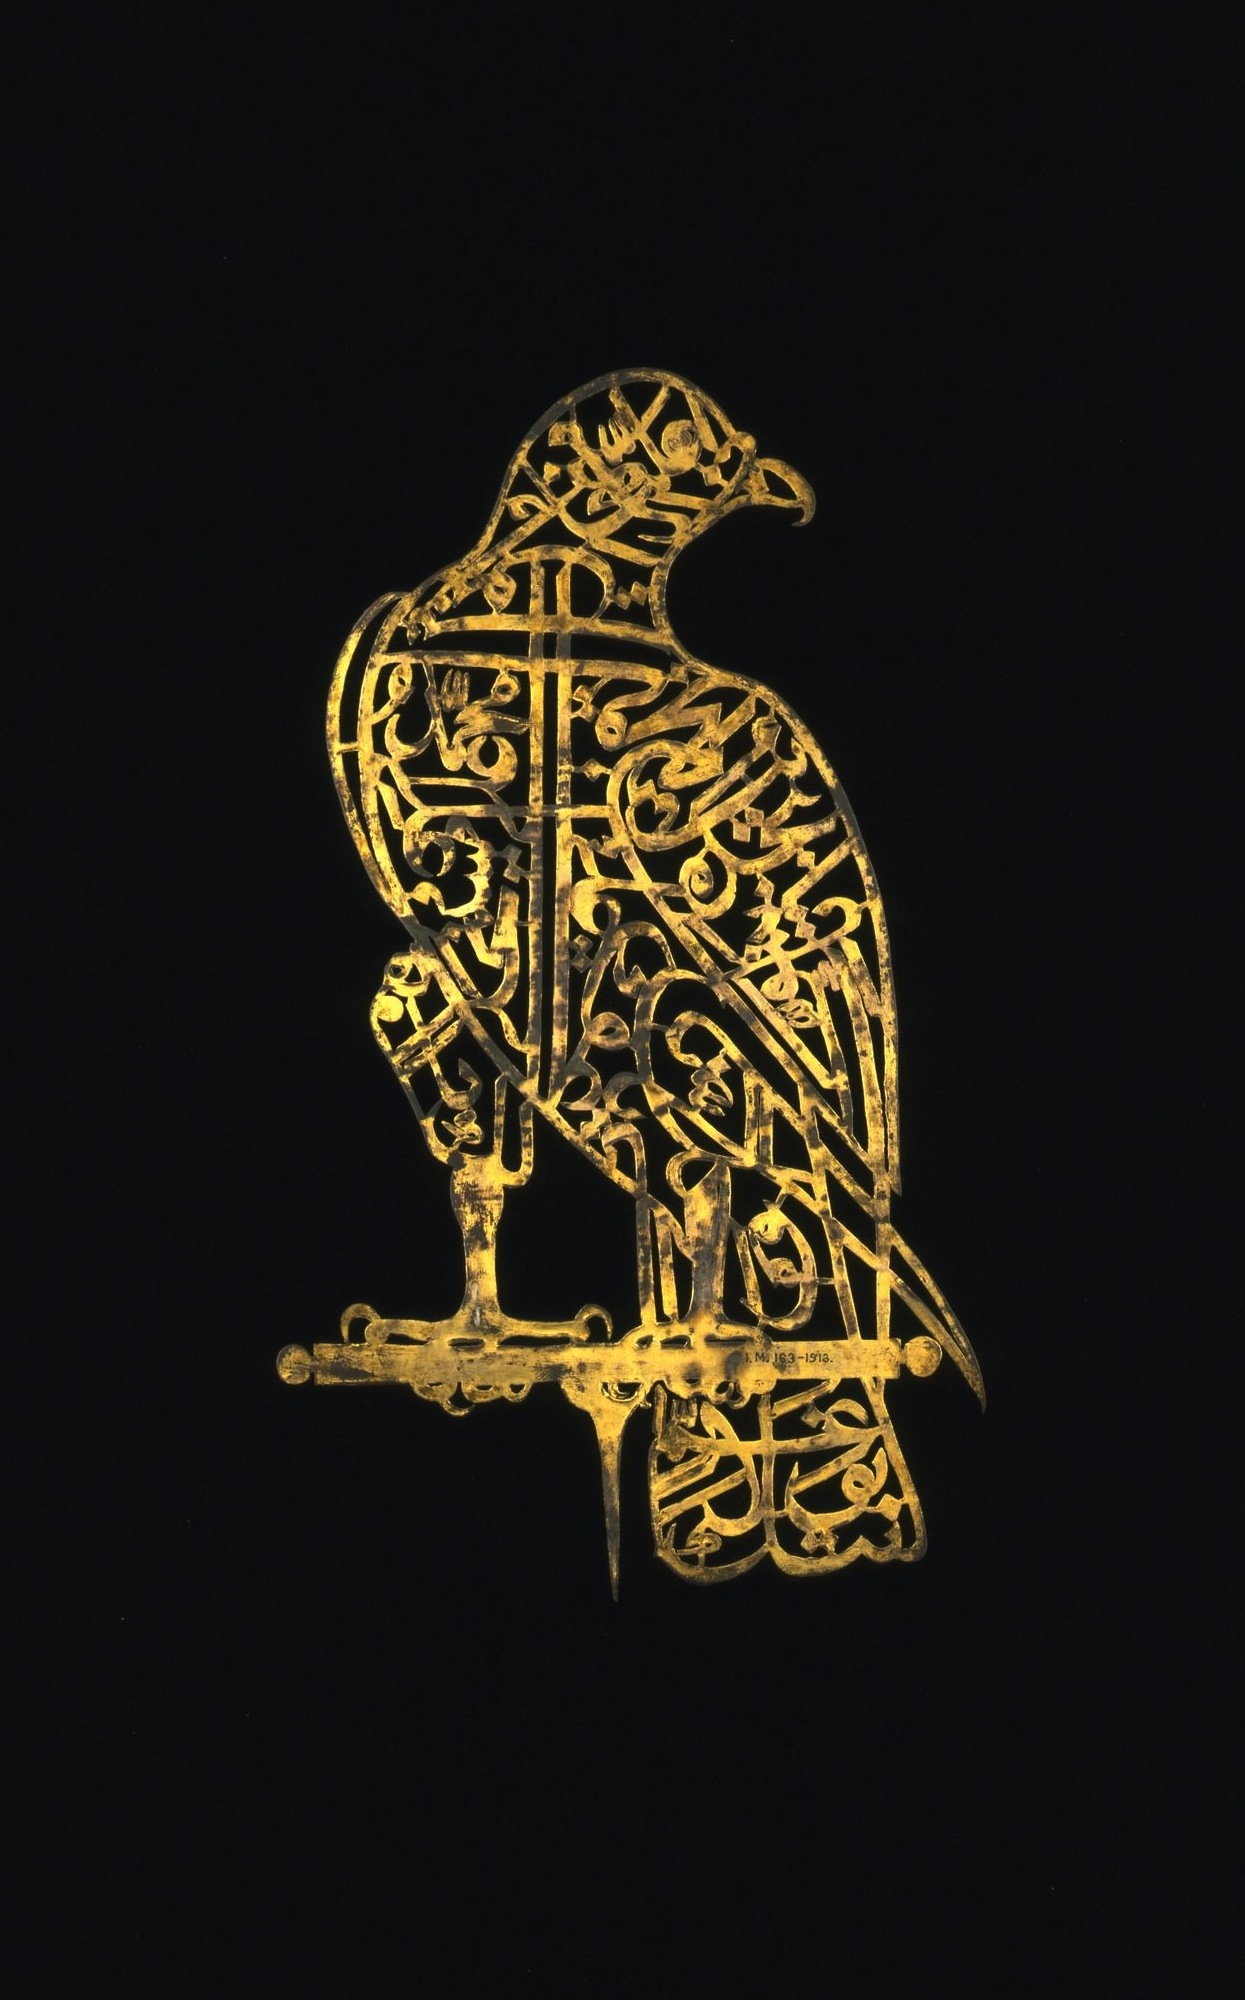 Perforated gilt copper, India